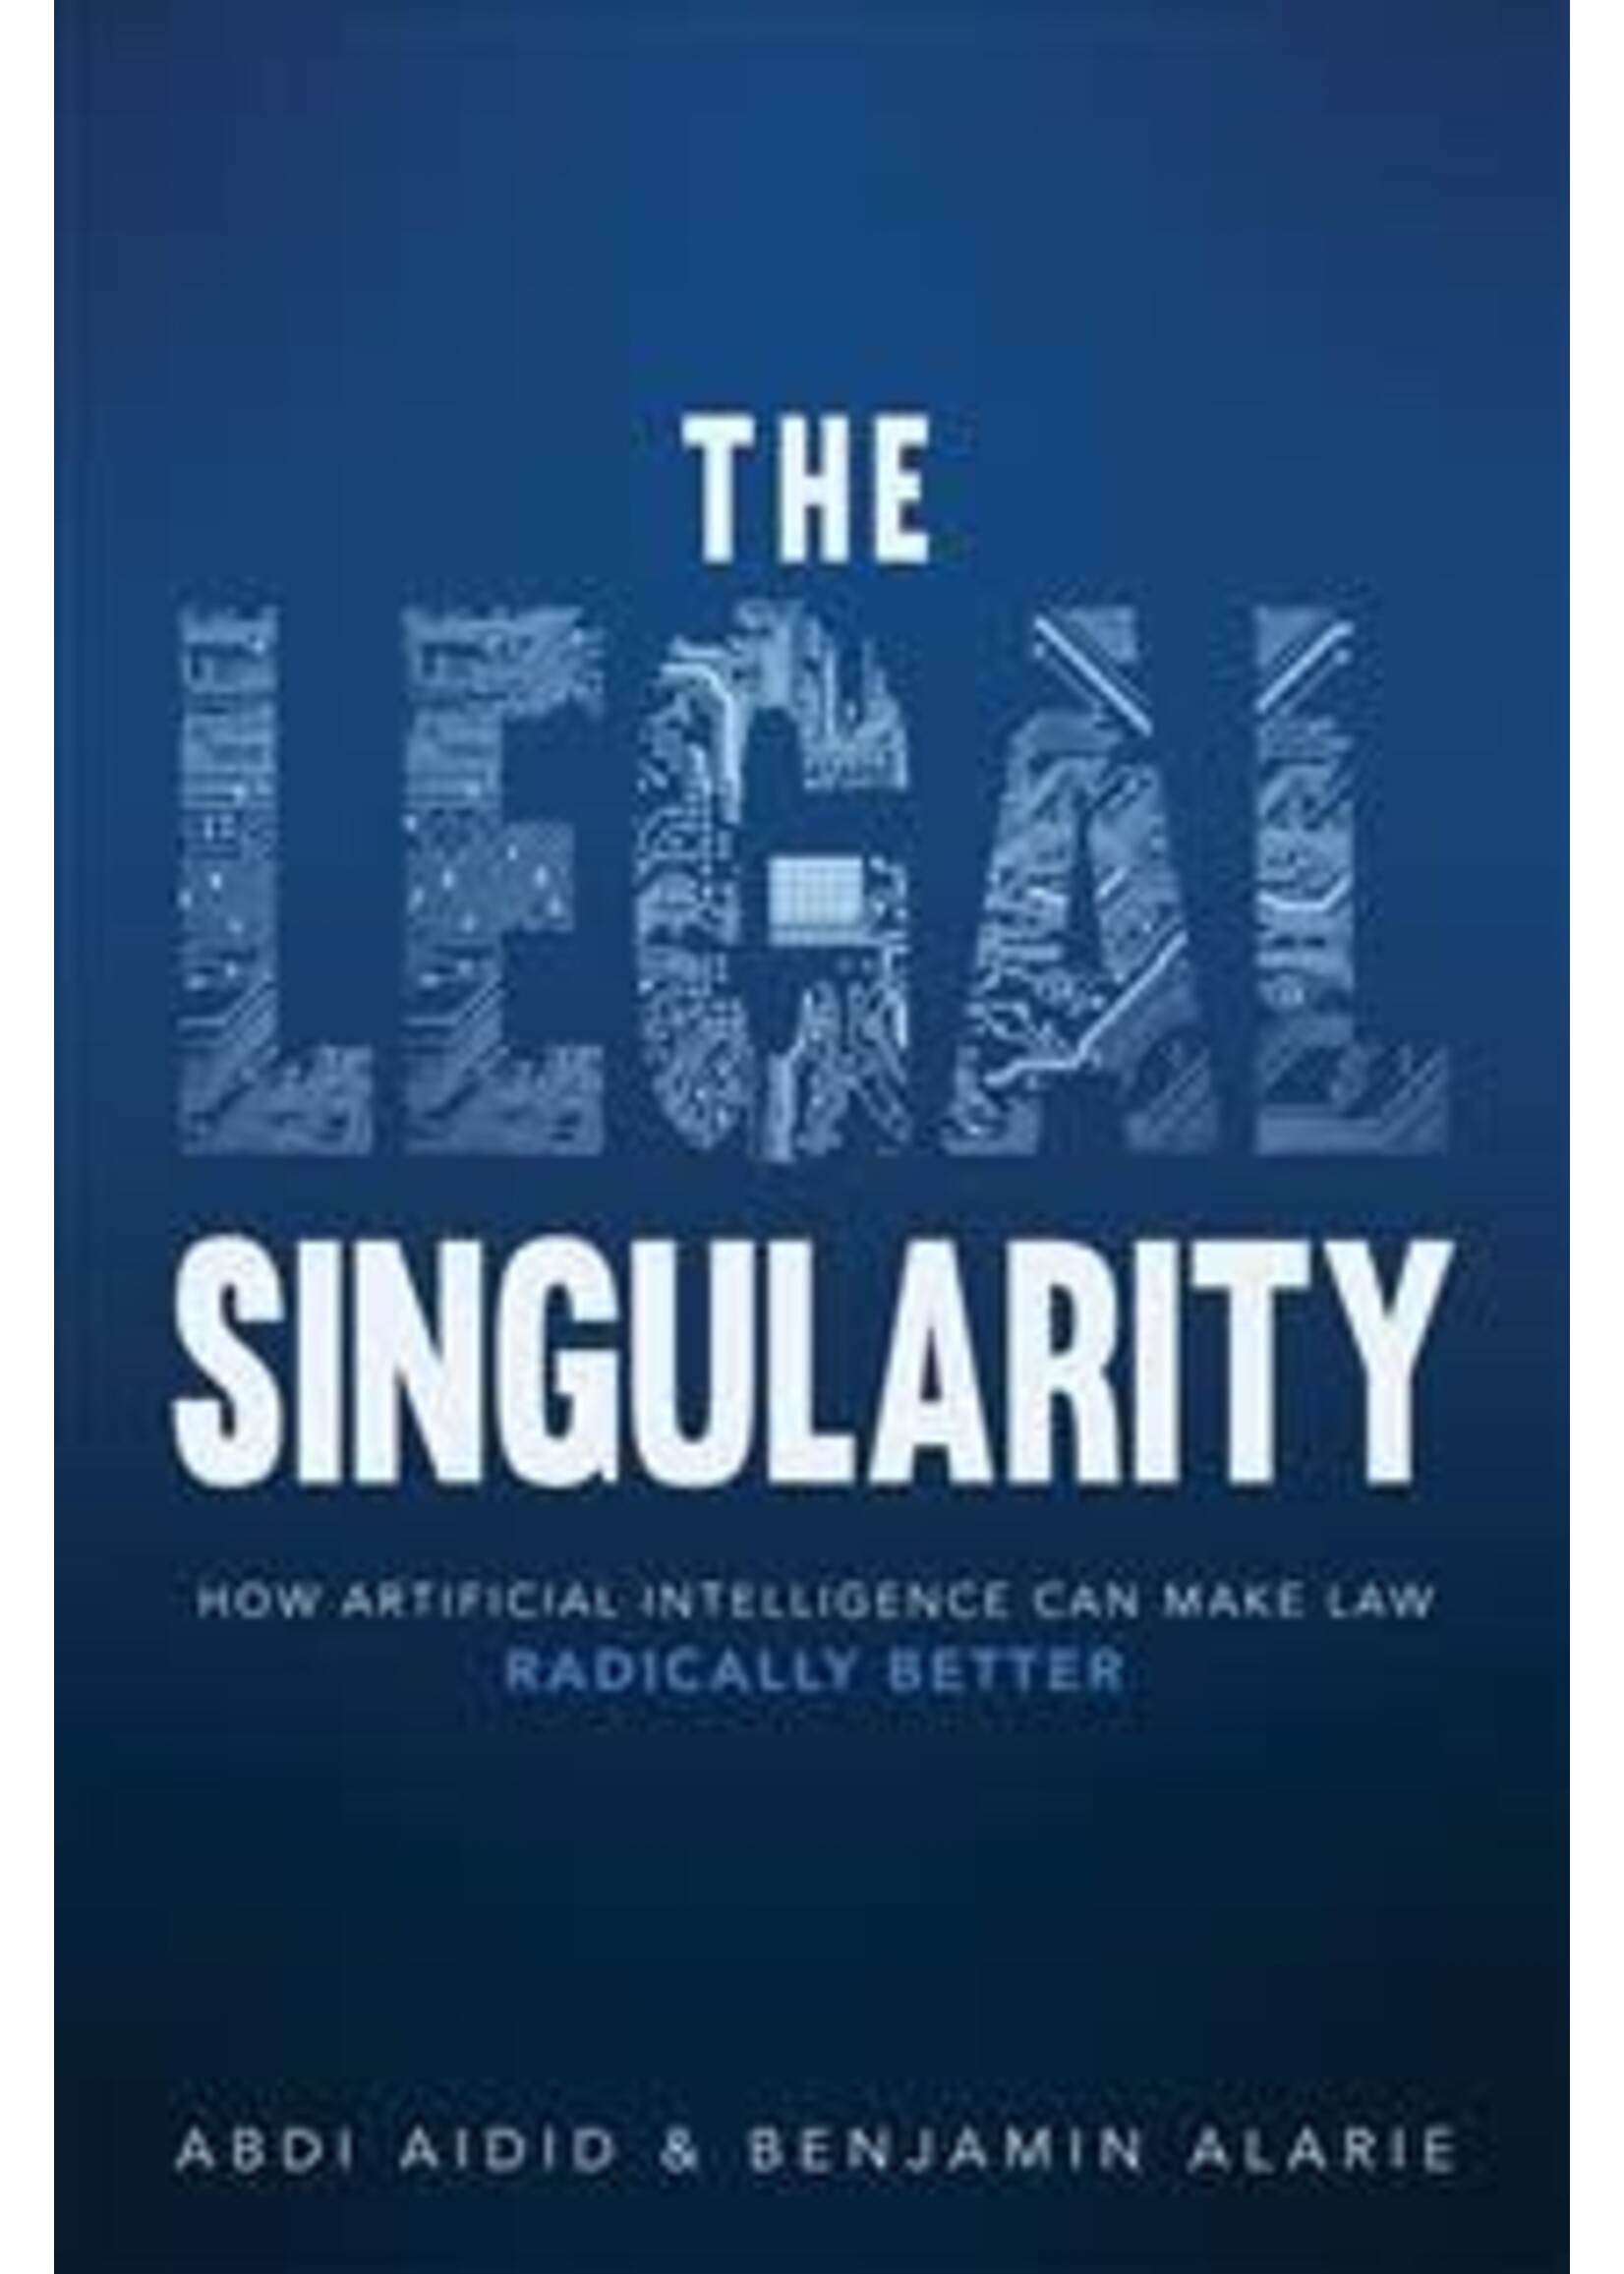 The Legal Singularity: How Artificial Intelligence Can Make Law Radically Better by Abdirashid Aidid, Benjamin Alarie